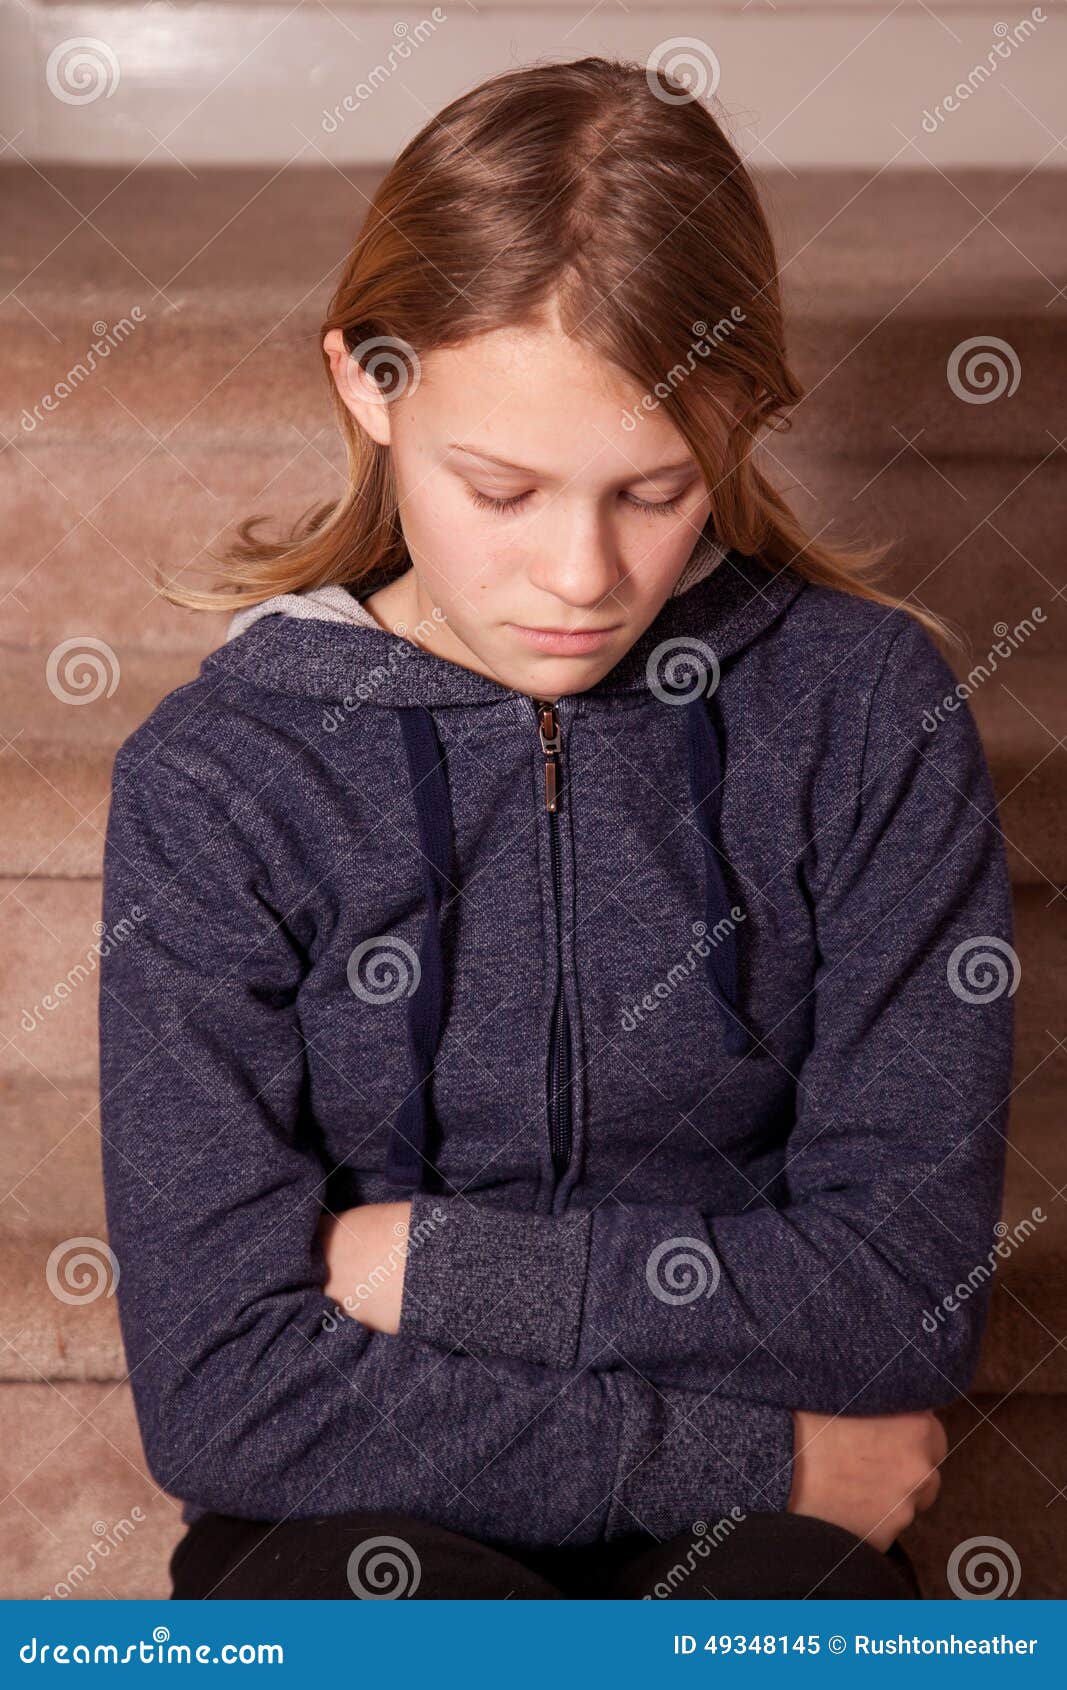 Adolescent girl pouting stock image. Image of background - 49348145